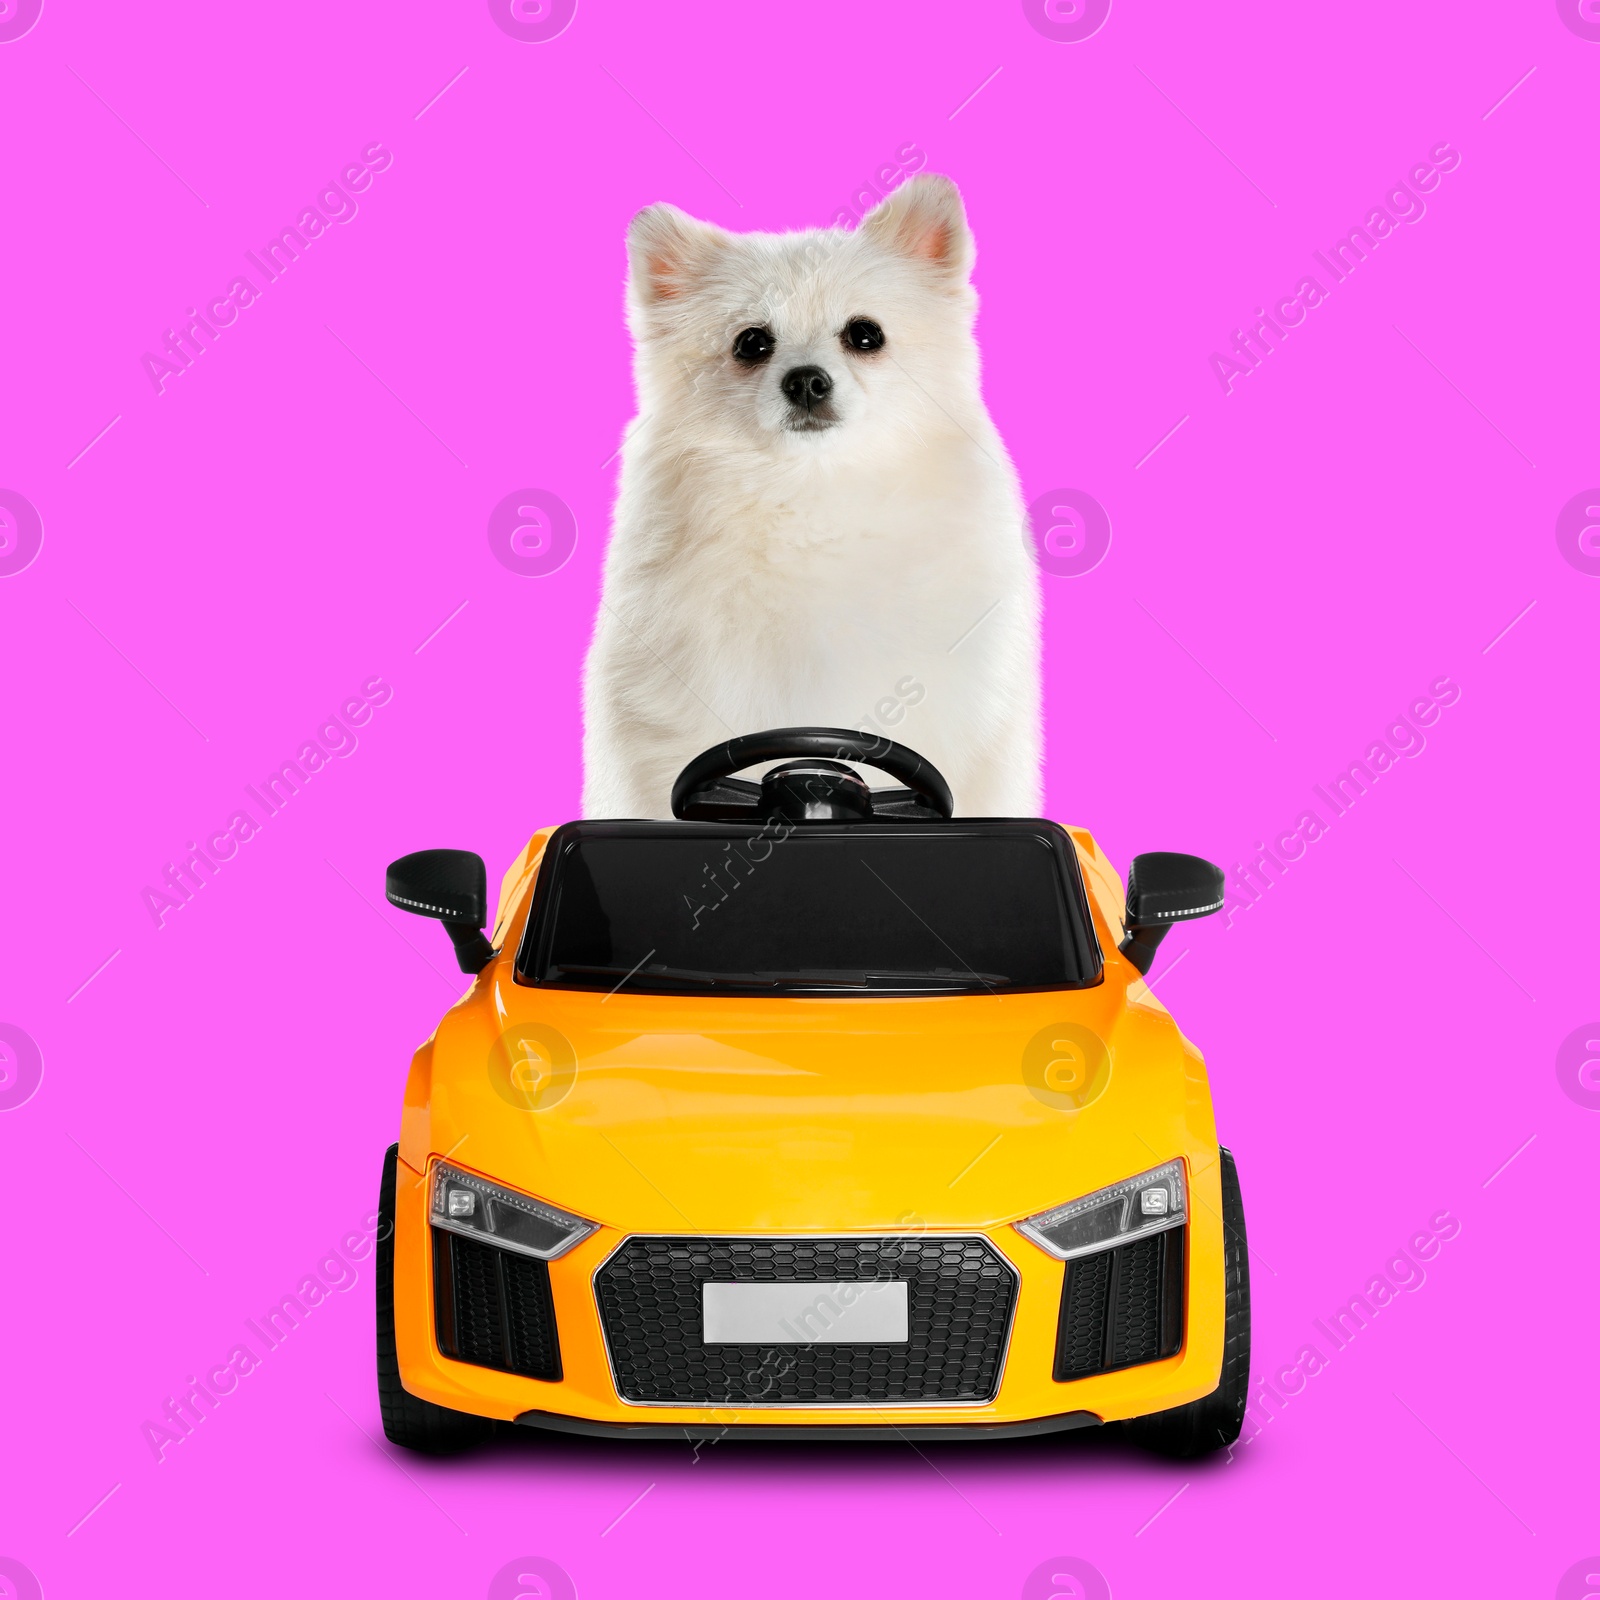 Image of Adorable German dog Spitz in toy car on magenta background